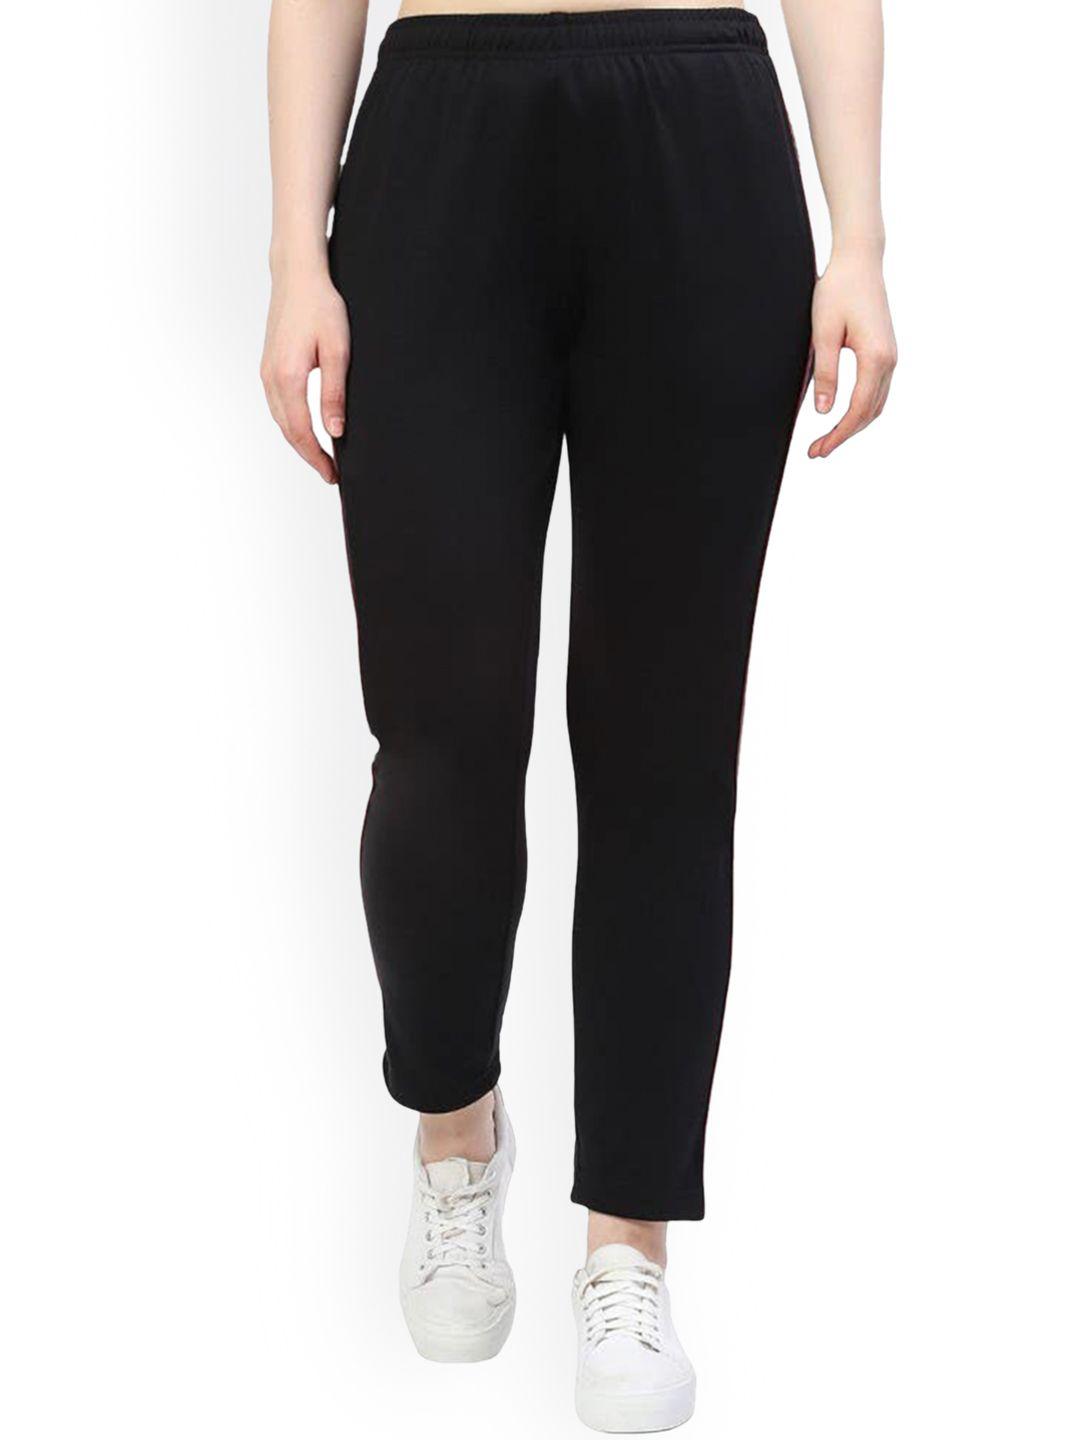 2bme women mid-rise track pants with side panel detail